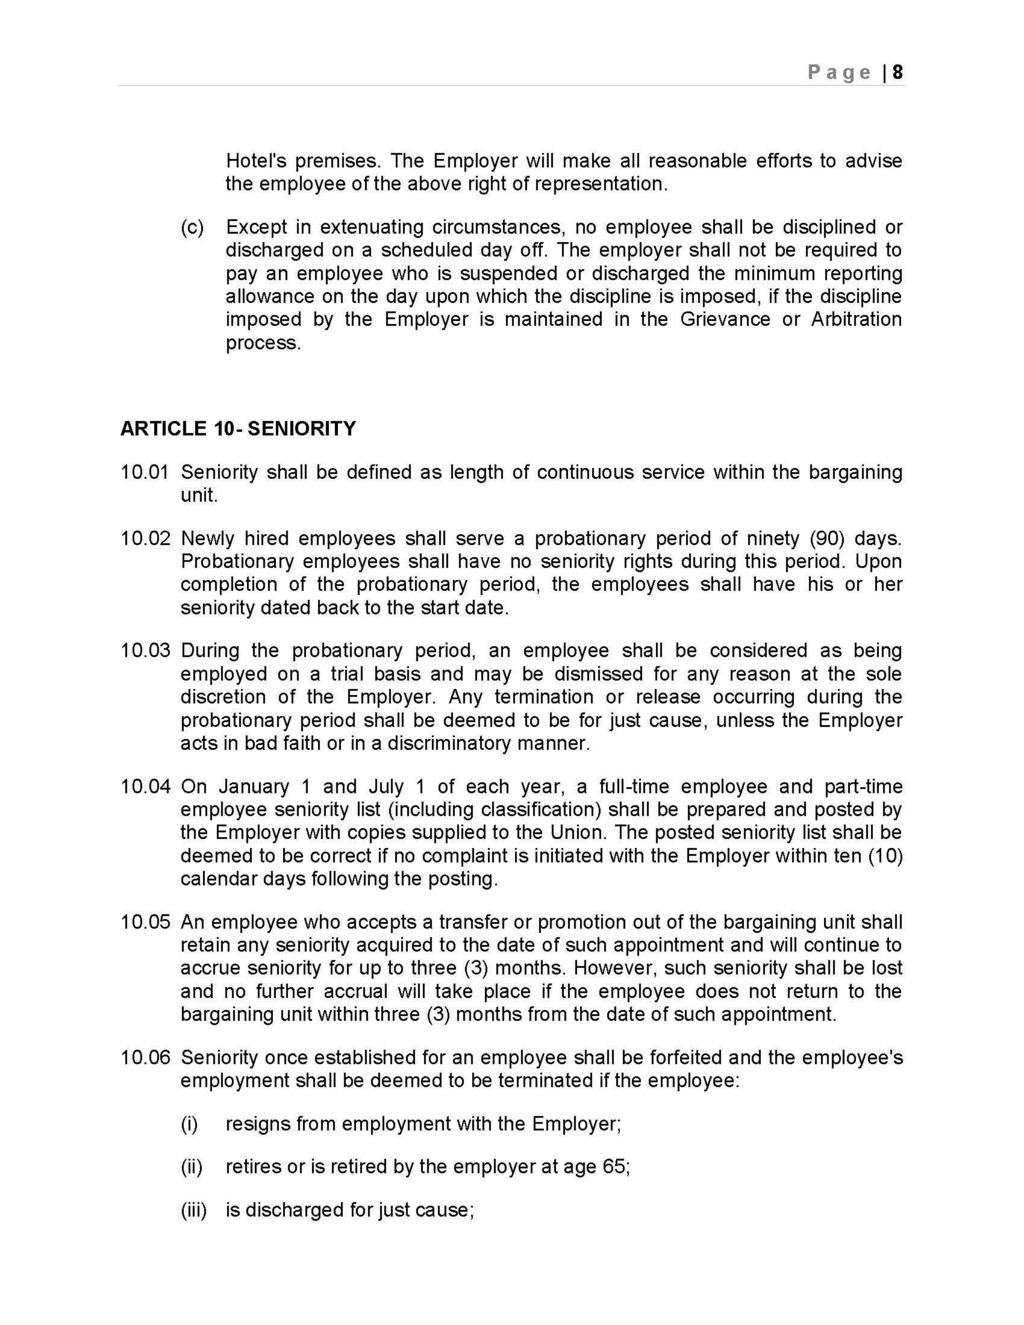 Page 18 Hotel's premises. The Employer will make all reasonable efforts to advise the employee of the above right of representation.